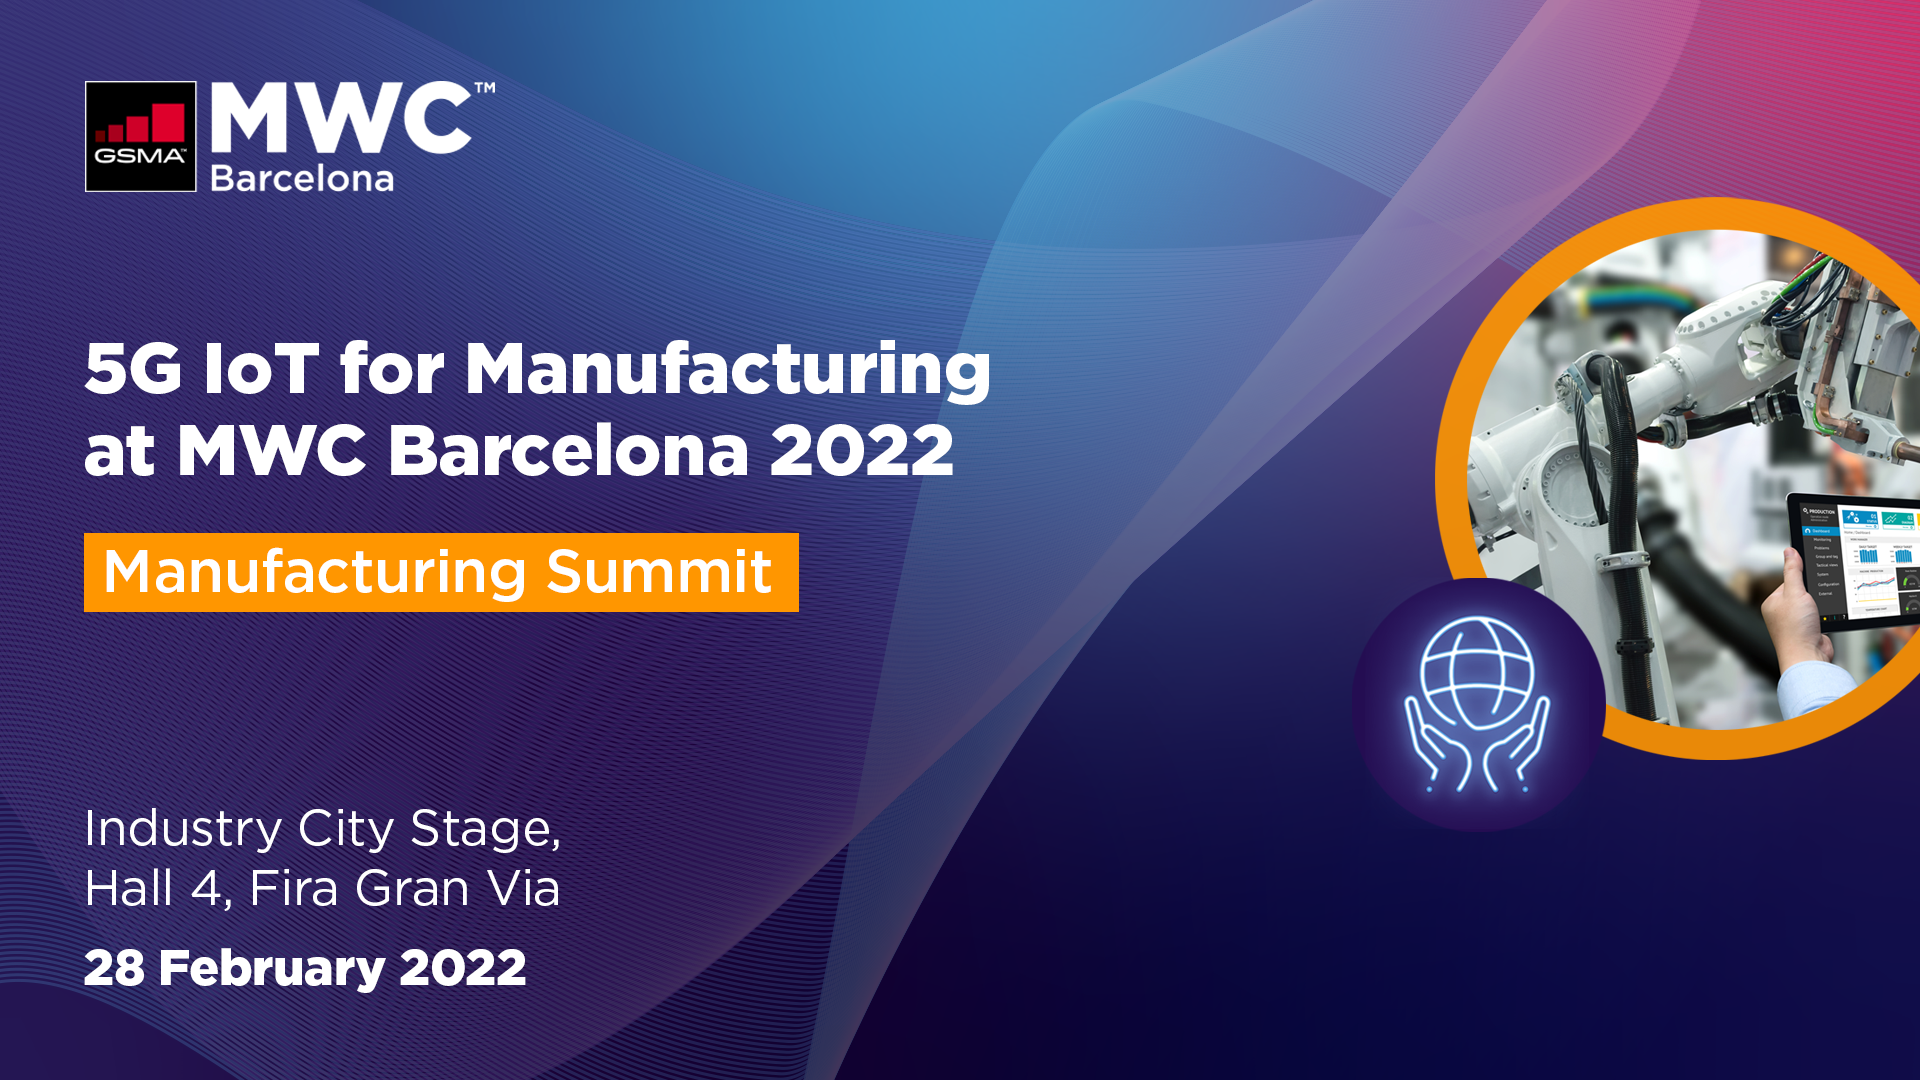 Manufacturing Summit at MWC Barcelona 2022